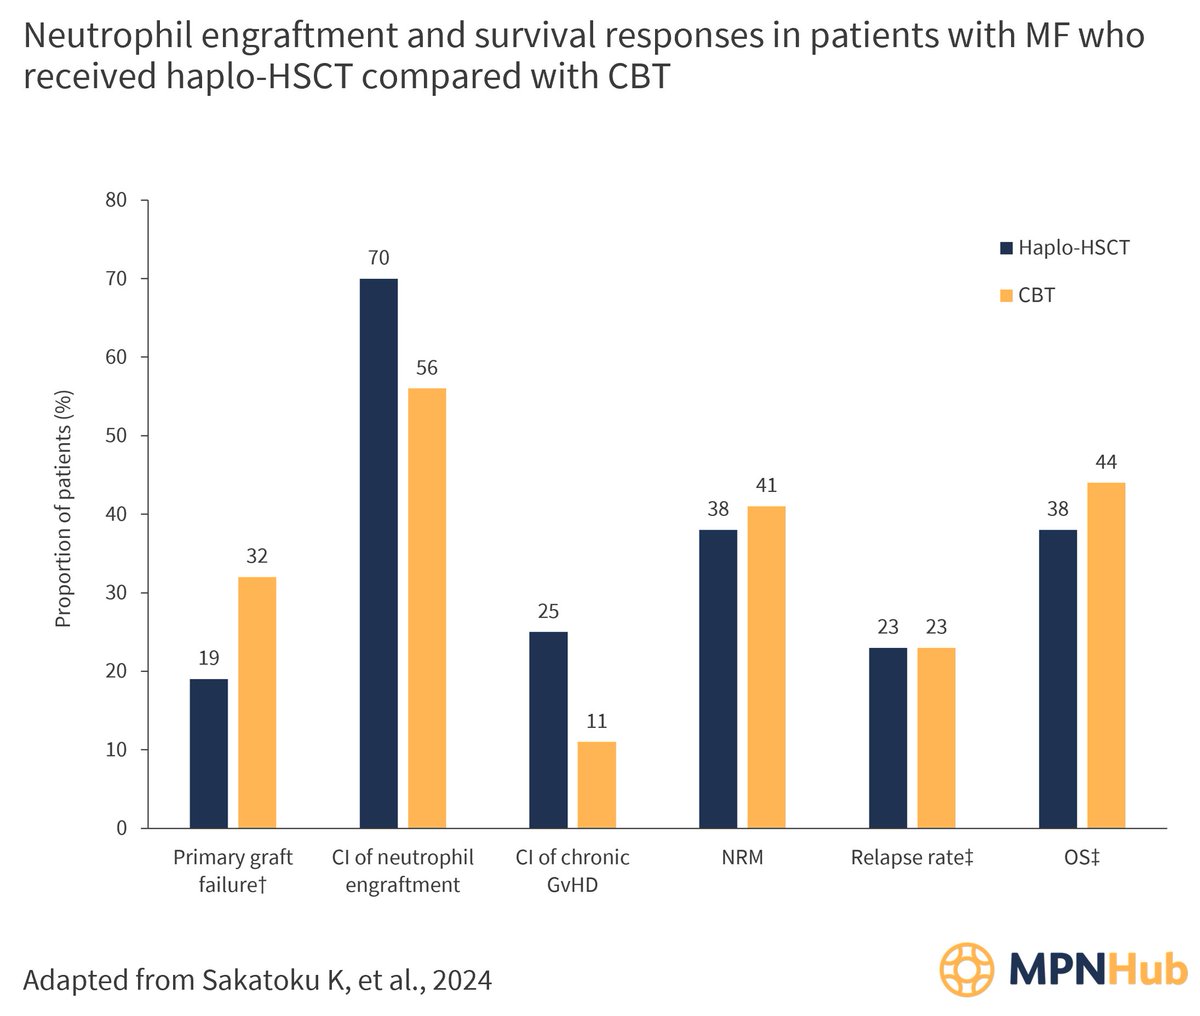 If a matched donor is not available for an allo-HSCT in patients with #MF, what is the next best alternative transplant option? Find out more here: loom.ly/-nv40TI #mpnsm #MedicalEducation